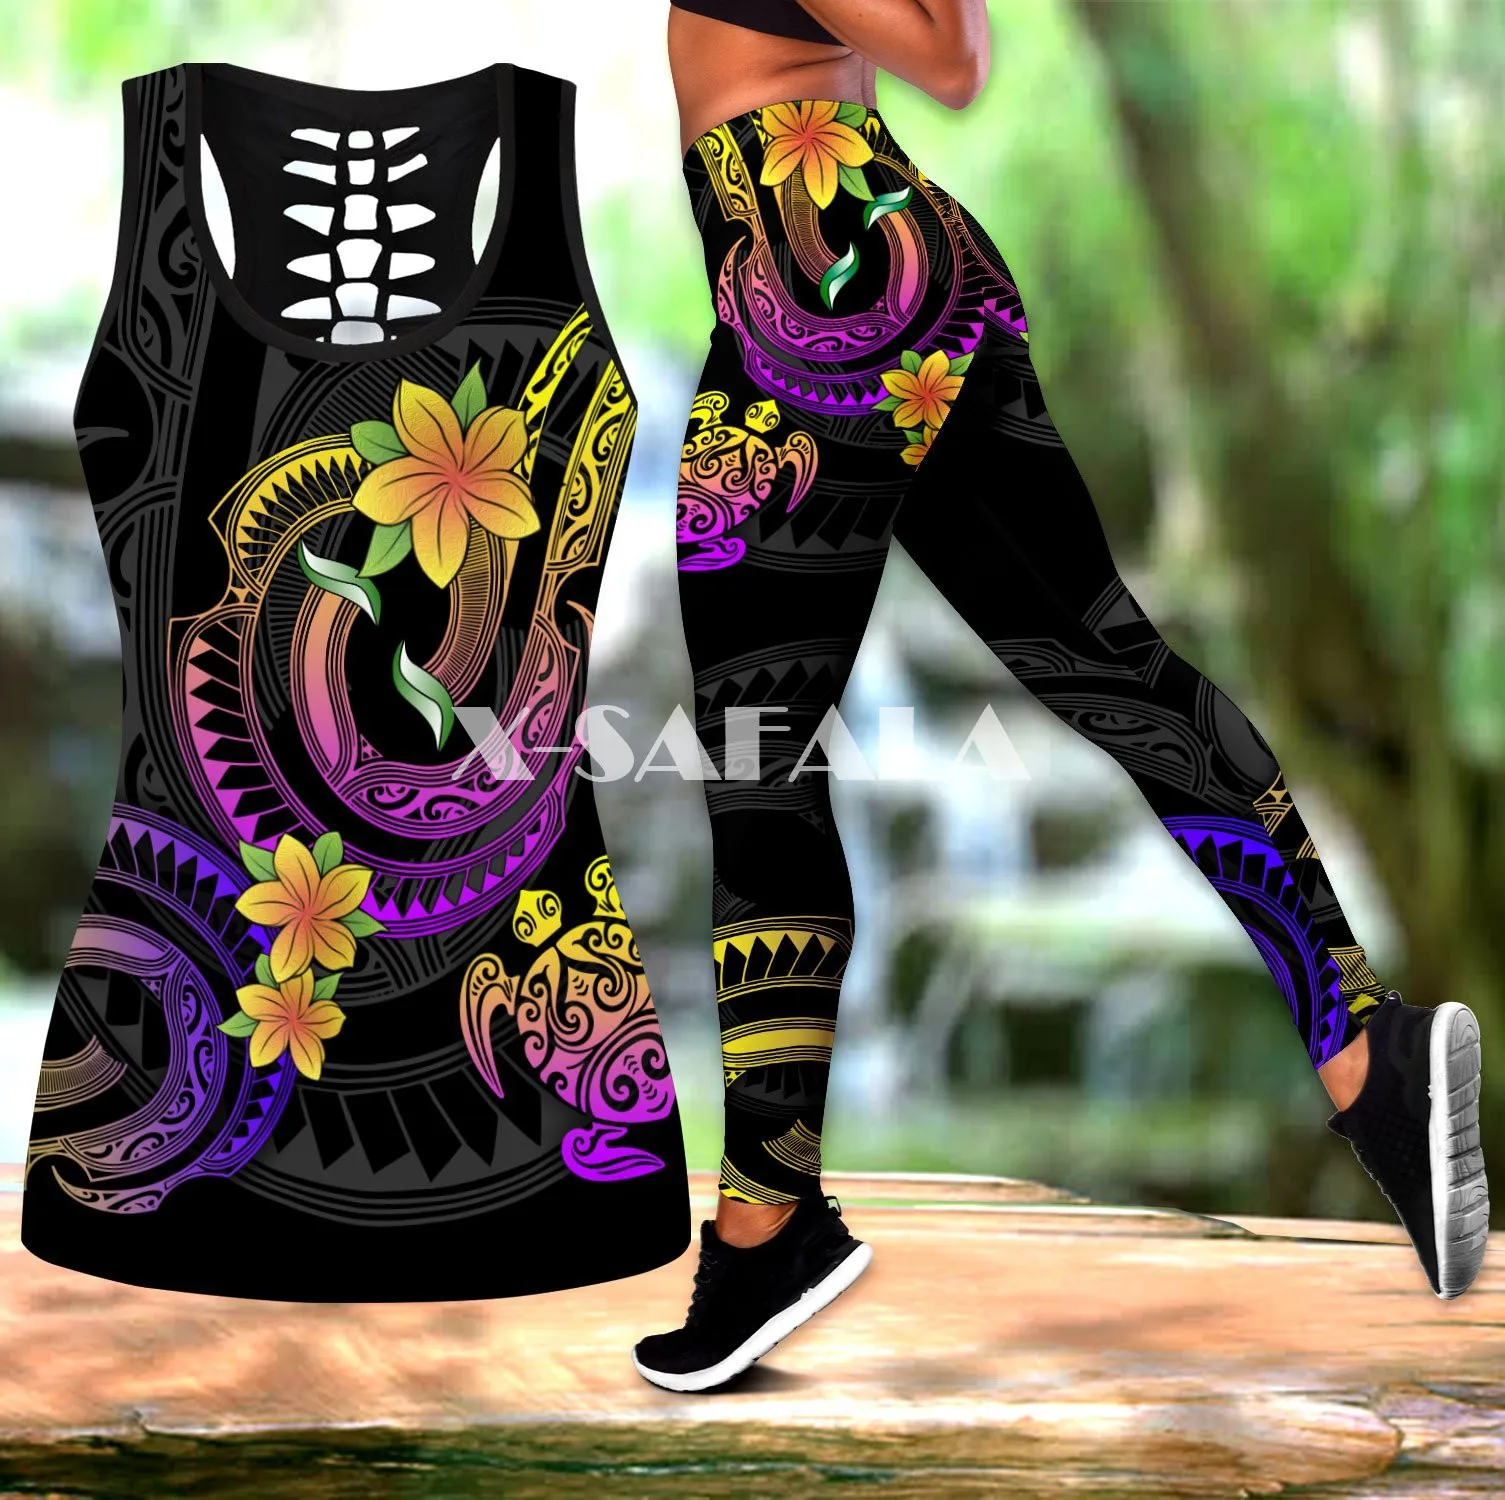 green pant suit The King Tiger Skin/Lion Animal Two Piece Yoga Set Women 3D Print Hollow Out Tank Top High Waist Legging Summer Casual Sport-1 pink jogging suit Suits & Blazers